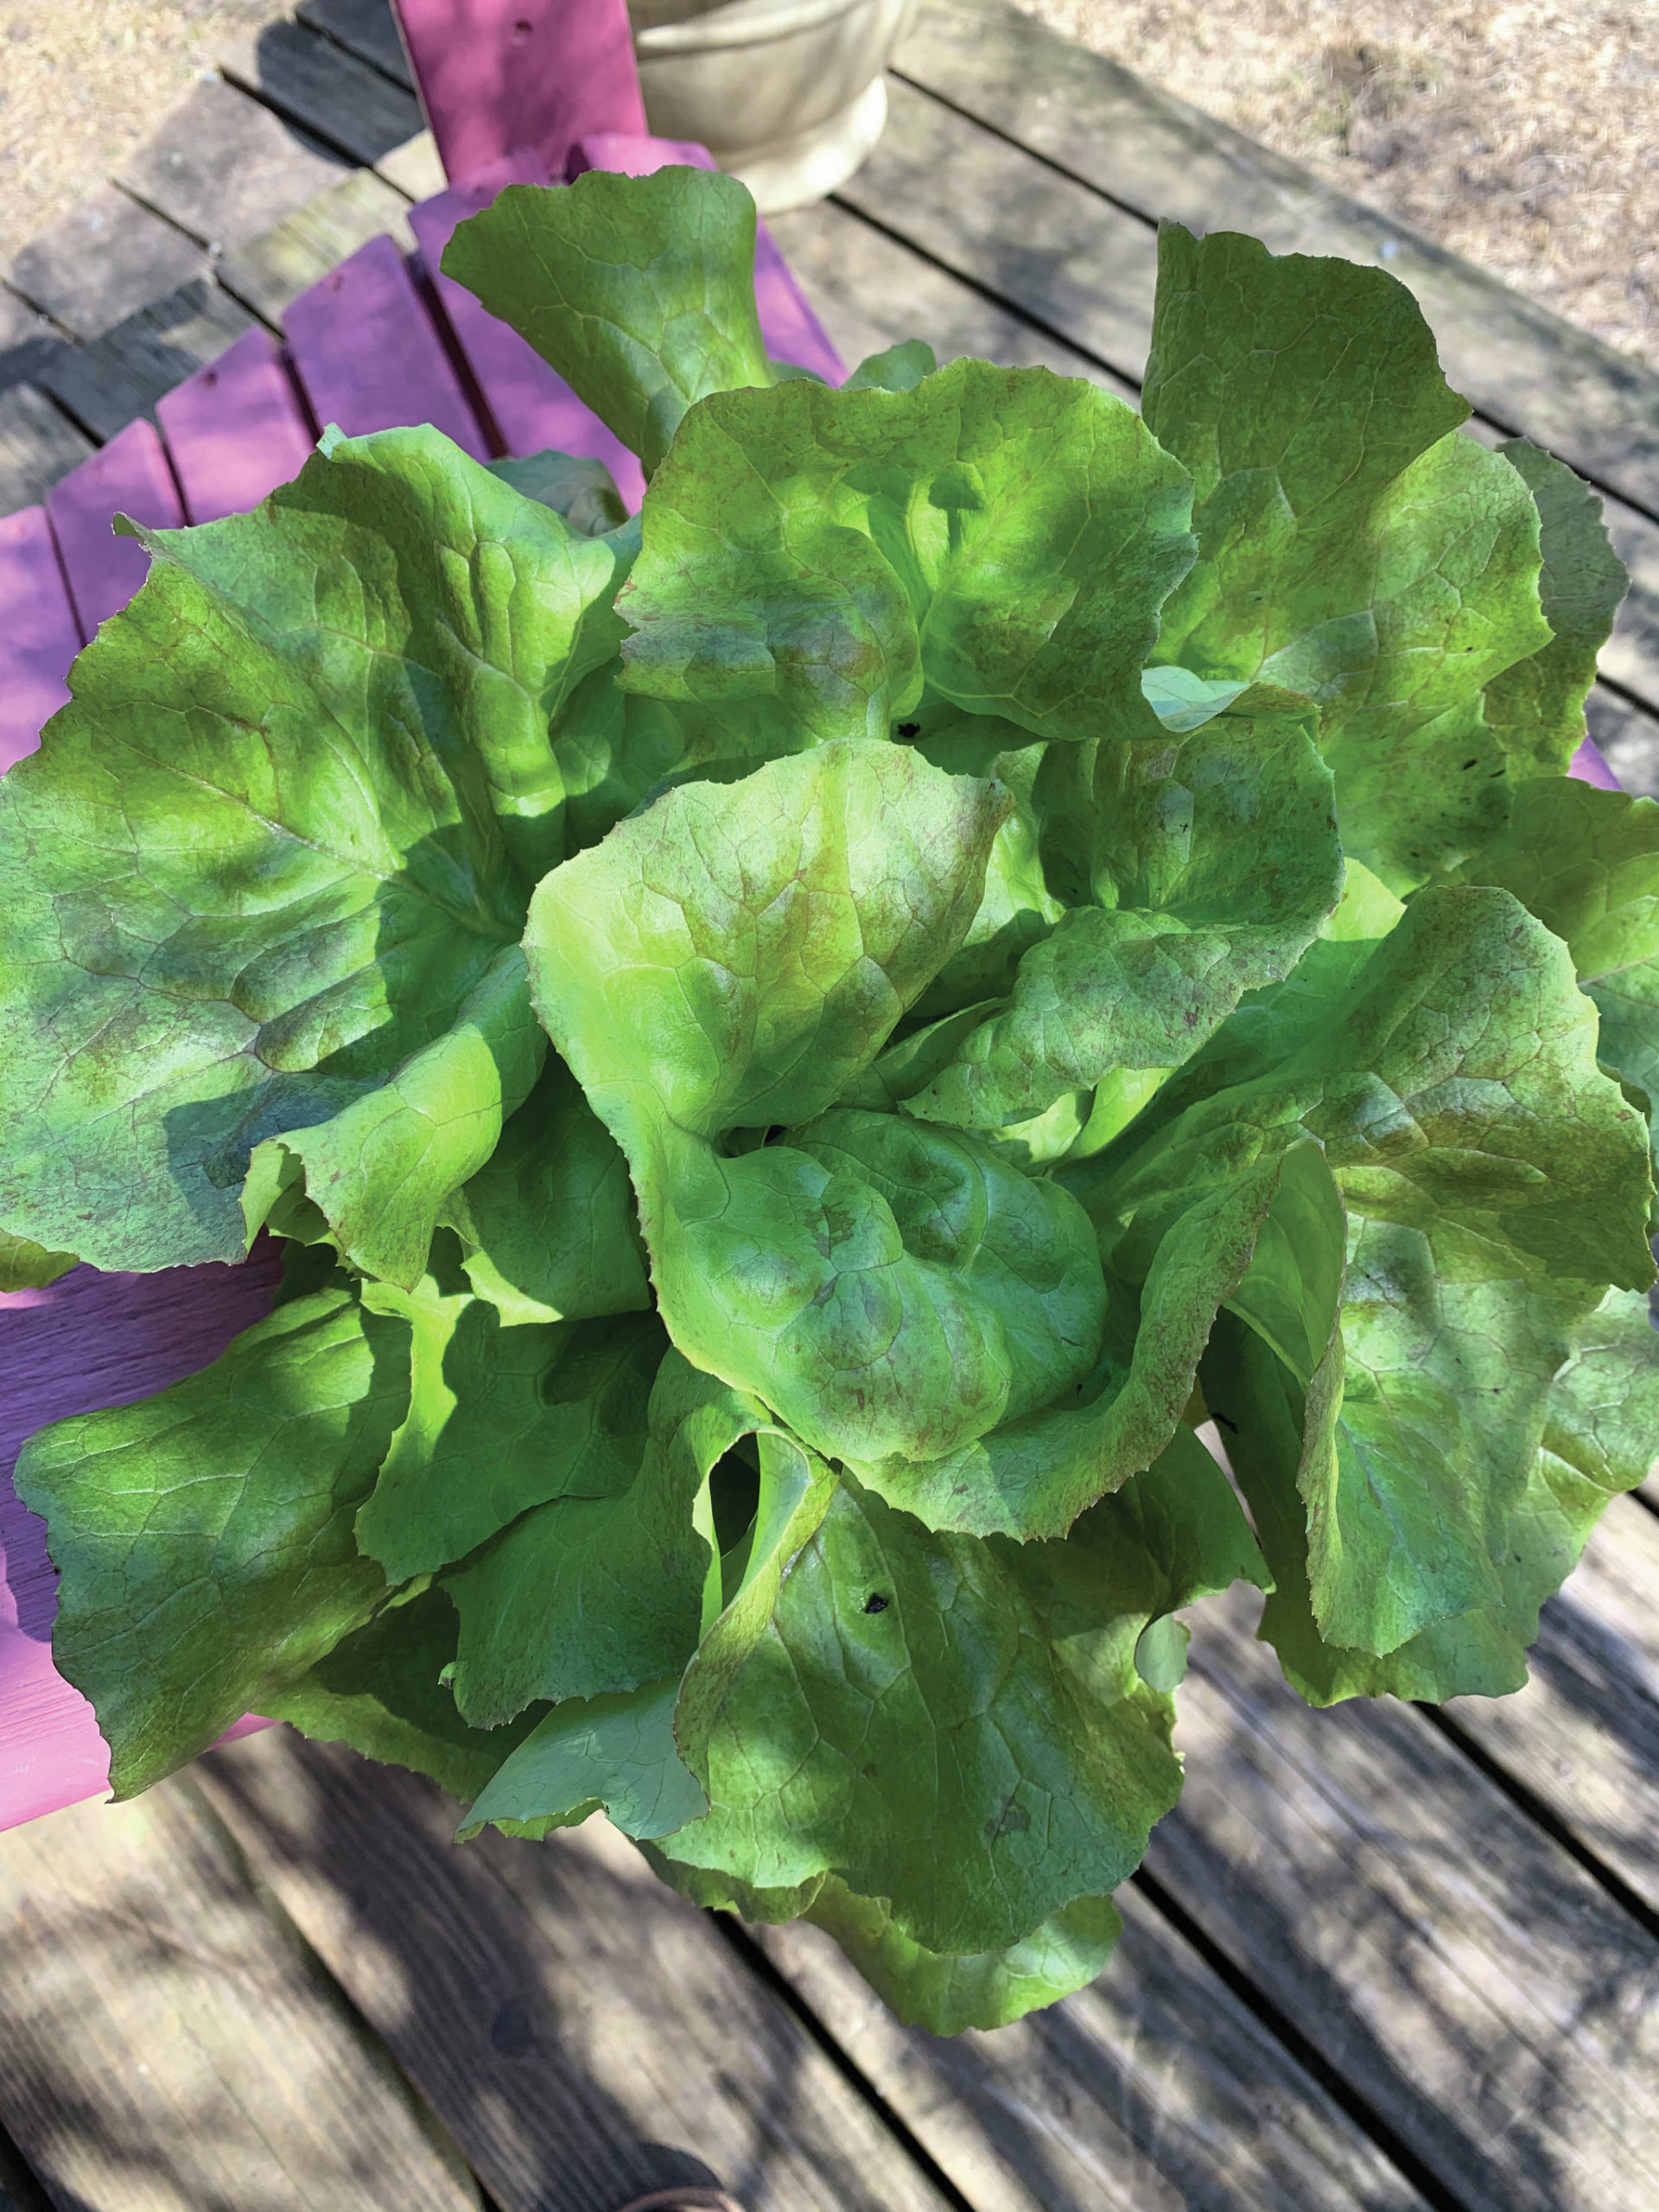 Skyphos lettuce grown in the greenhouse is seen here on May 7, 2021, at the Kachemak Gardener’s home in Homer, Alaska. When planted outdoors, which is the ultimate intention, the leaves are tinged with red. Its very hardy and slow to bolt. (Photo by Rosemary Fitzpatrick)